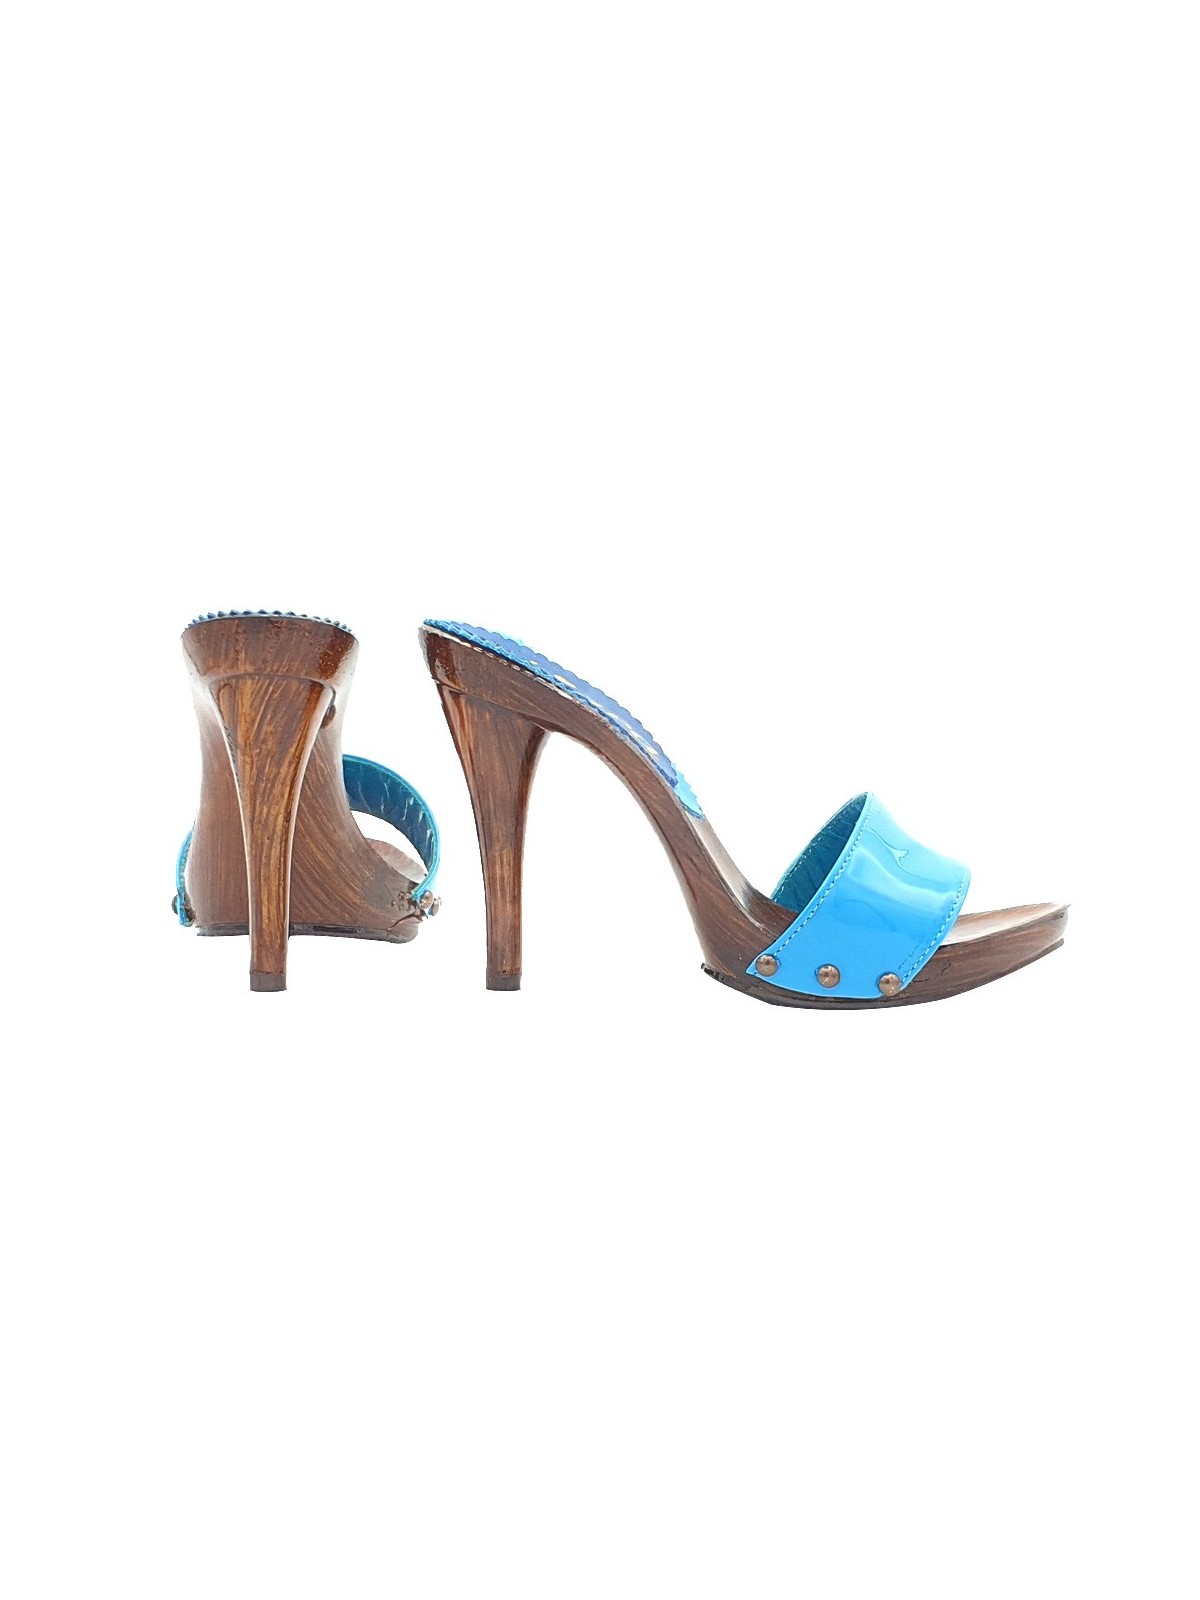 CLOGS IN TURQUOISE PATENT WITH HEEL 12